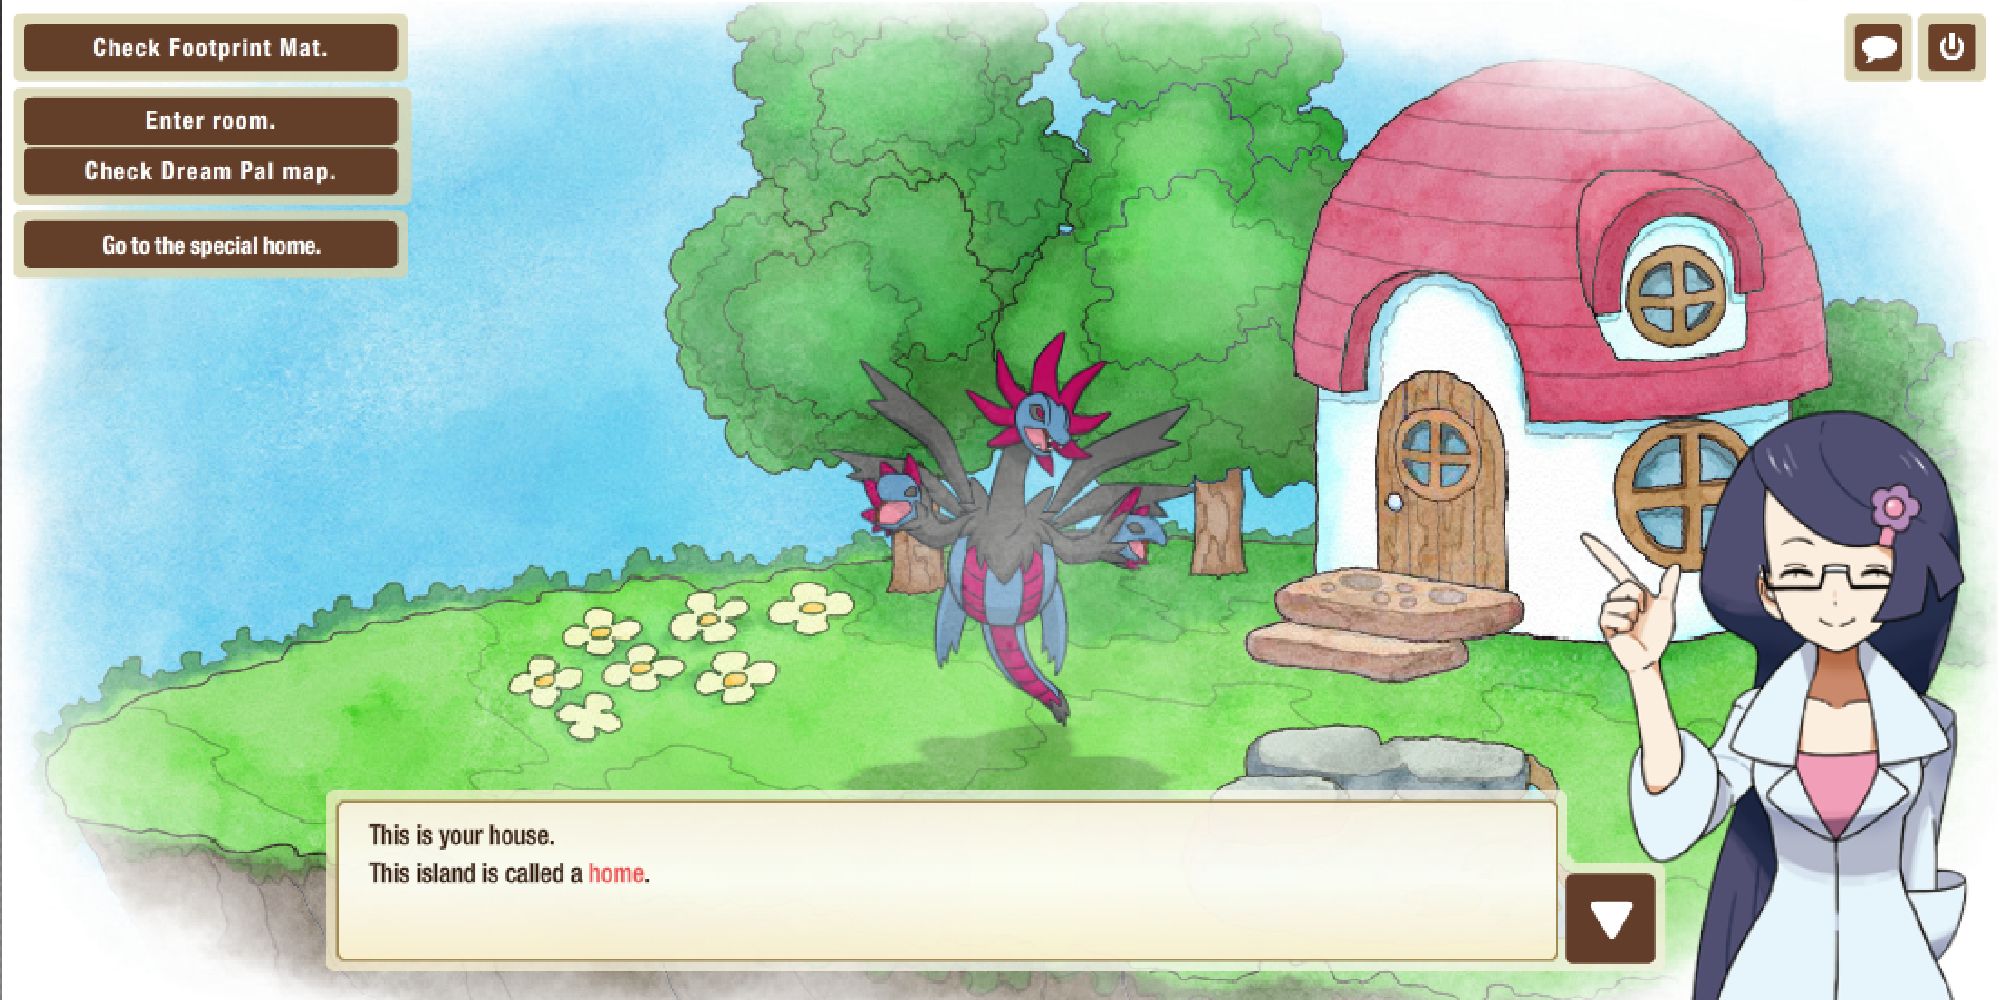 Fennel introducing players to their home in Pokemon Dream World, occupied by a Hydreigon